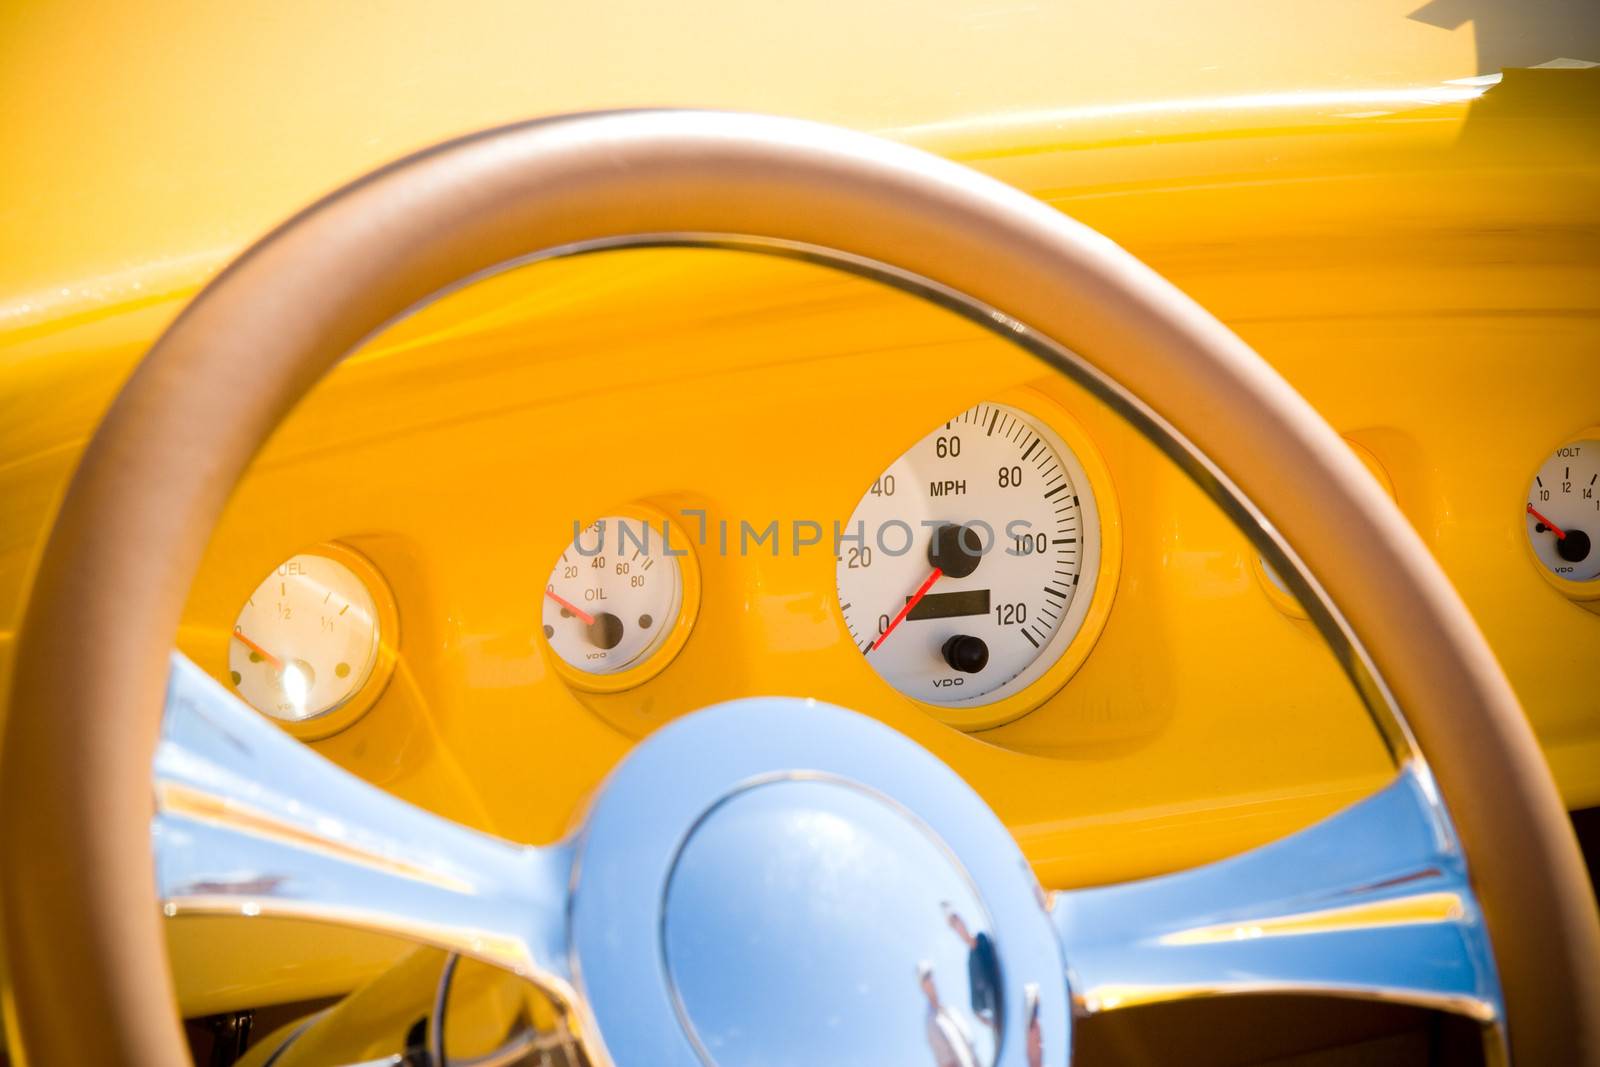 The dashboard and the steering wheel of a refurbished antique car.